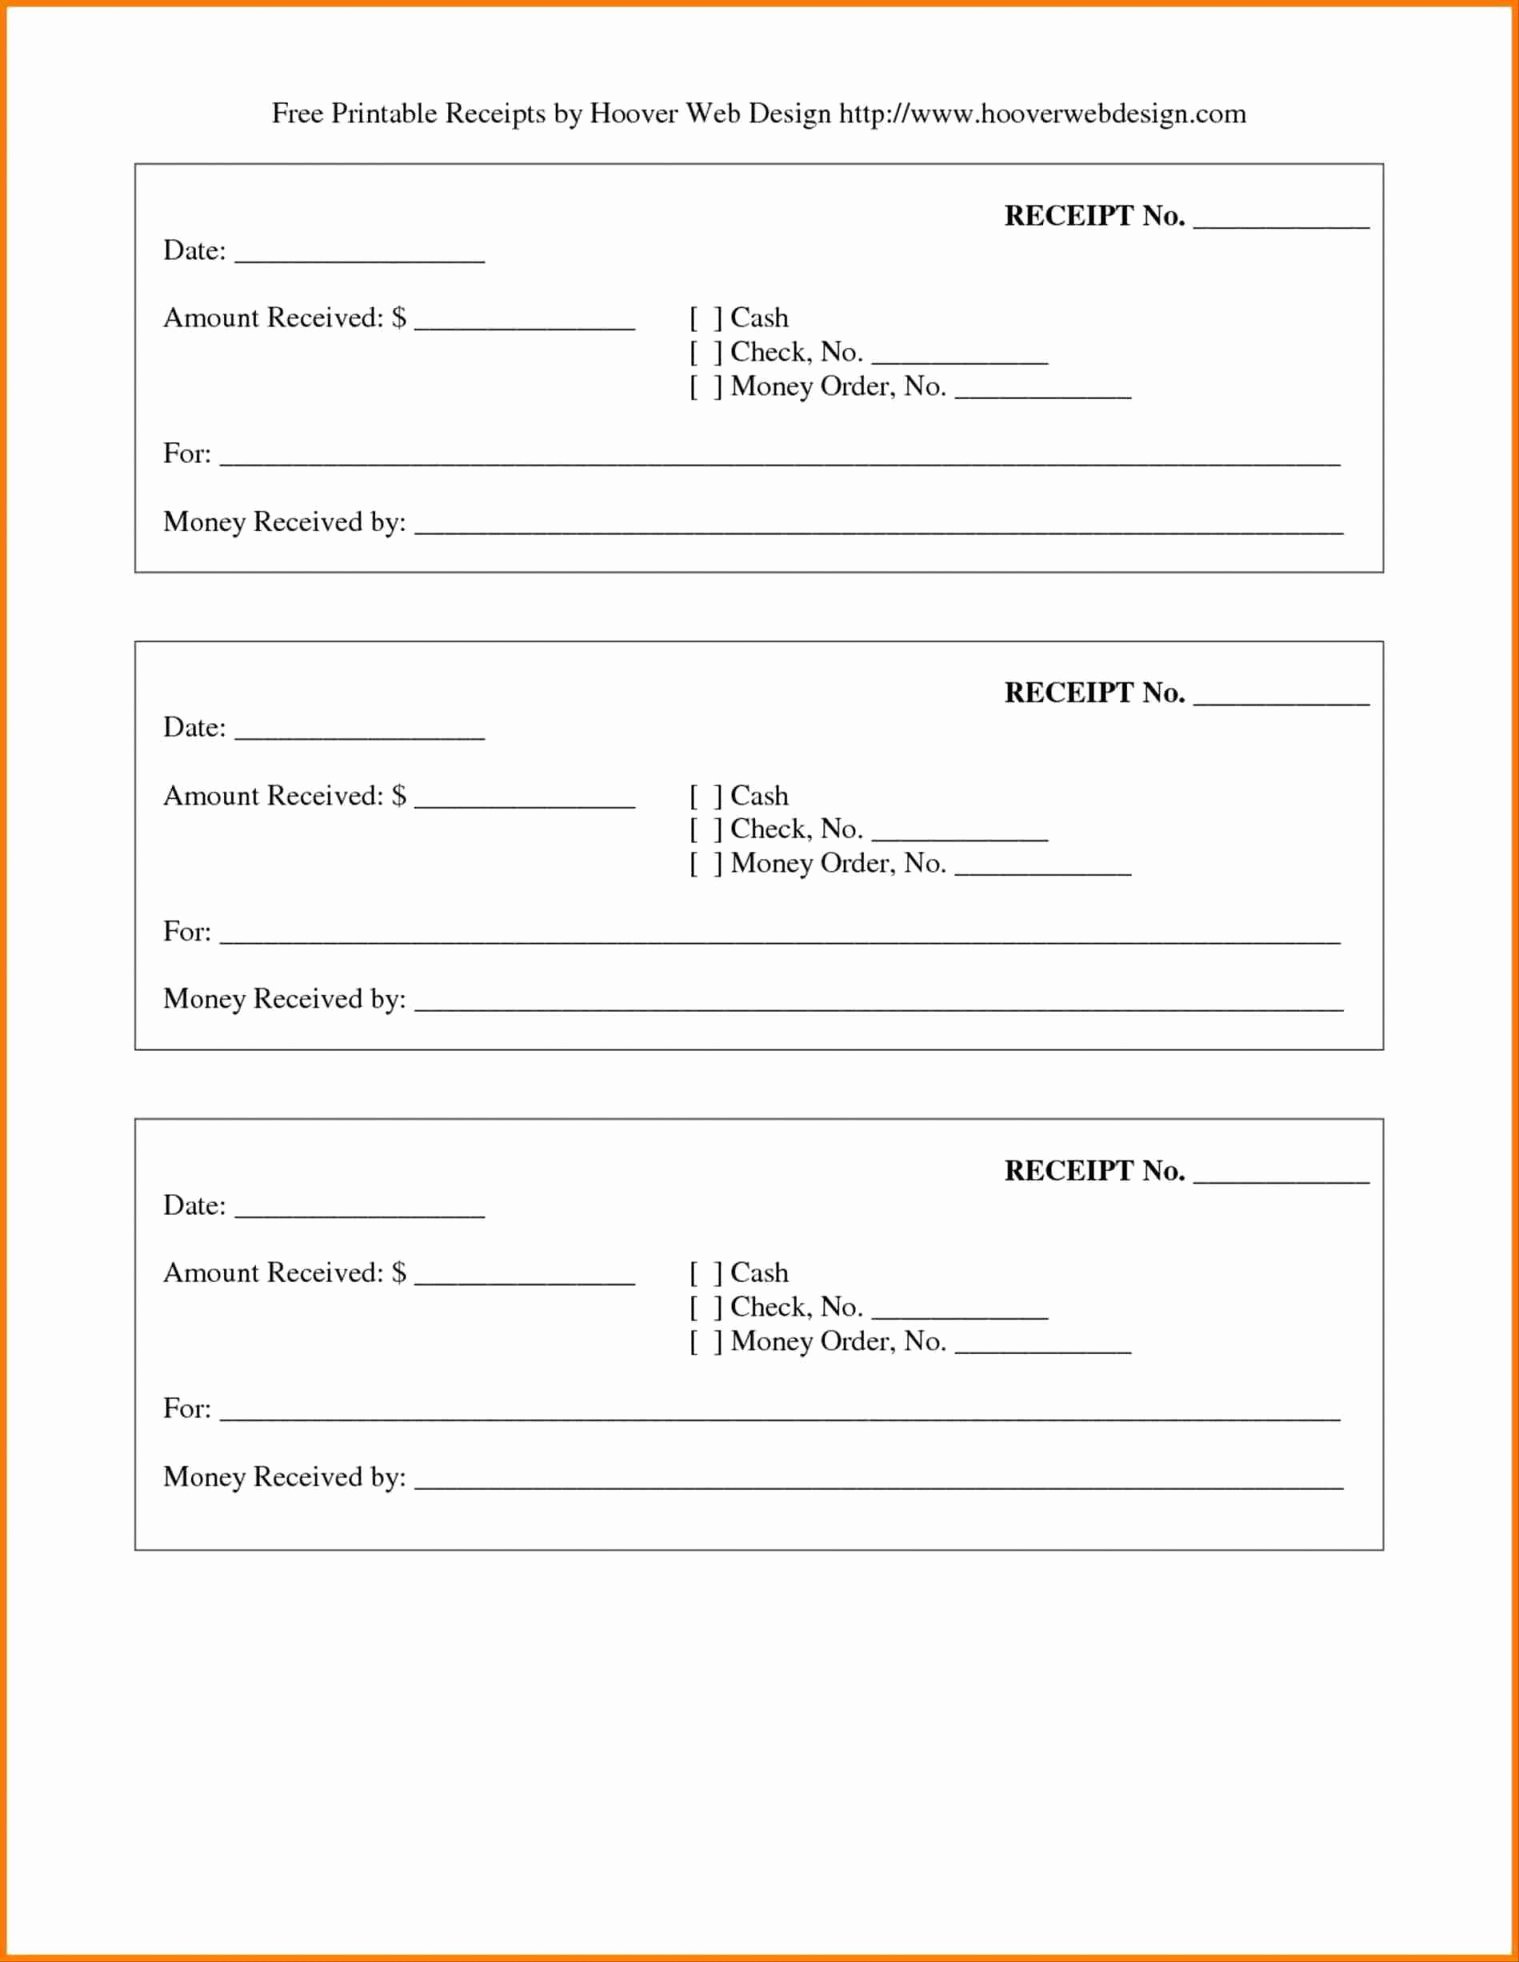 Lost Receipt form Template Lovely Lost Receipt form